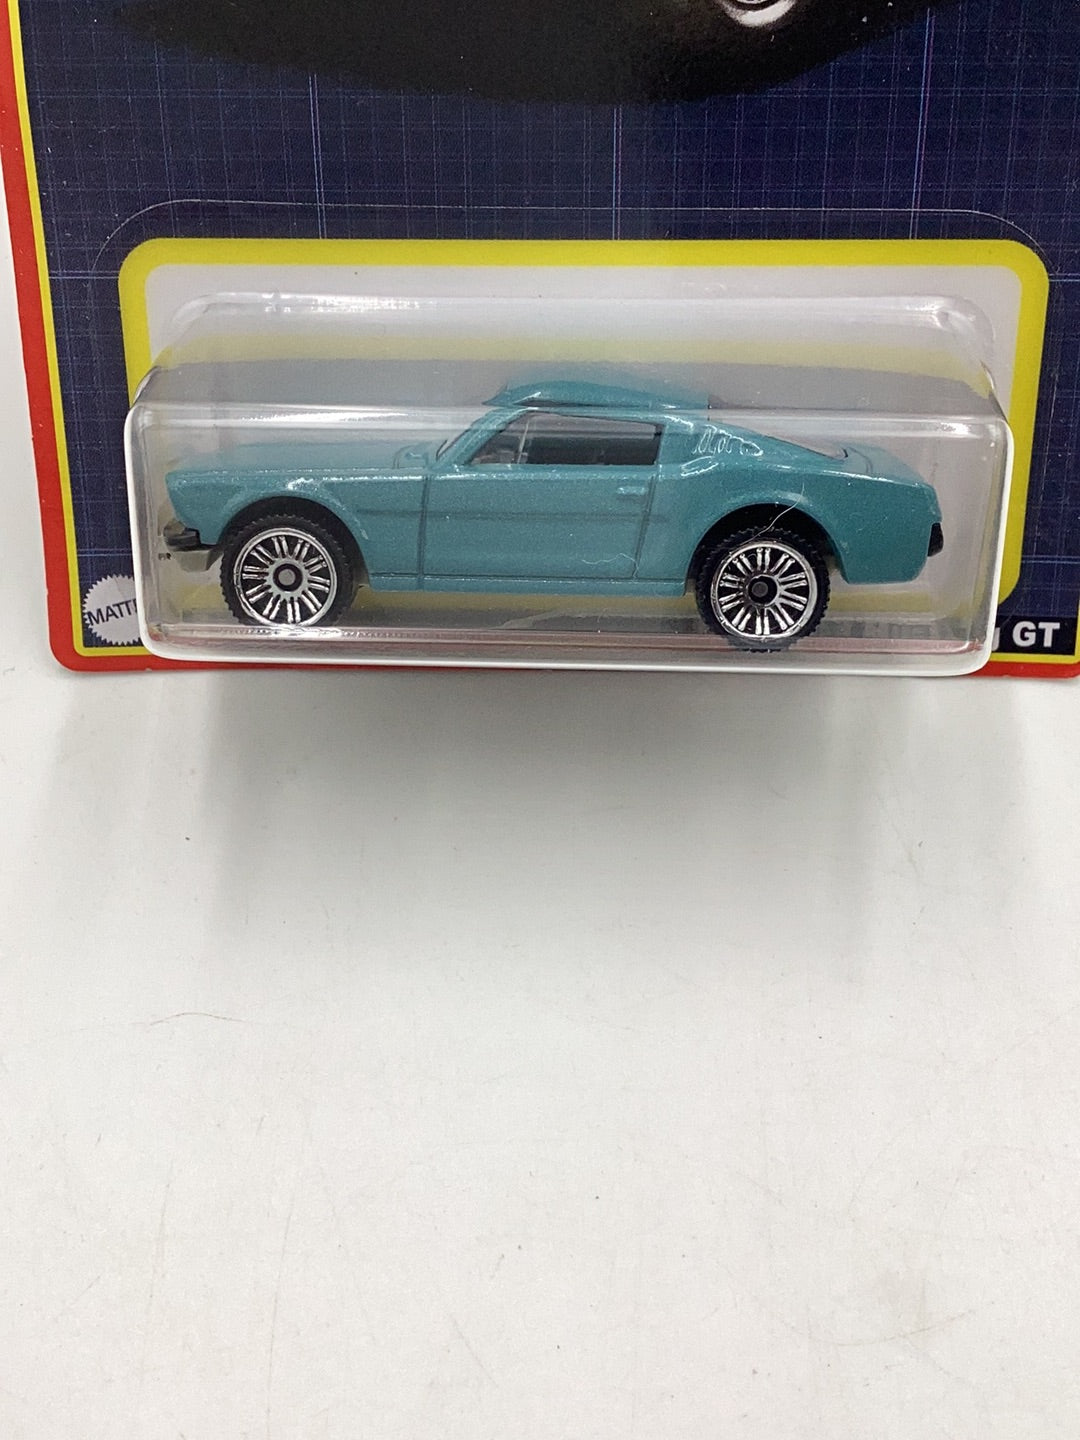 2022 Matchbox Retro Series #11 1965 Ford Mustang GT Target Exclusive EE2